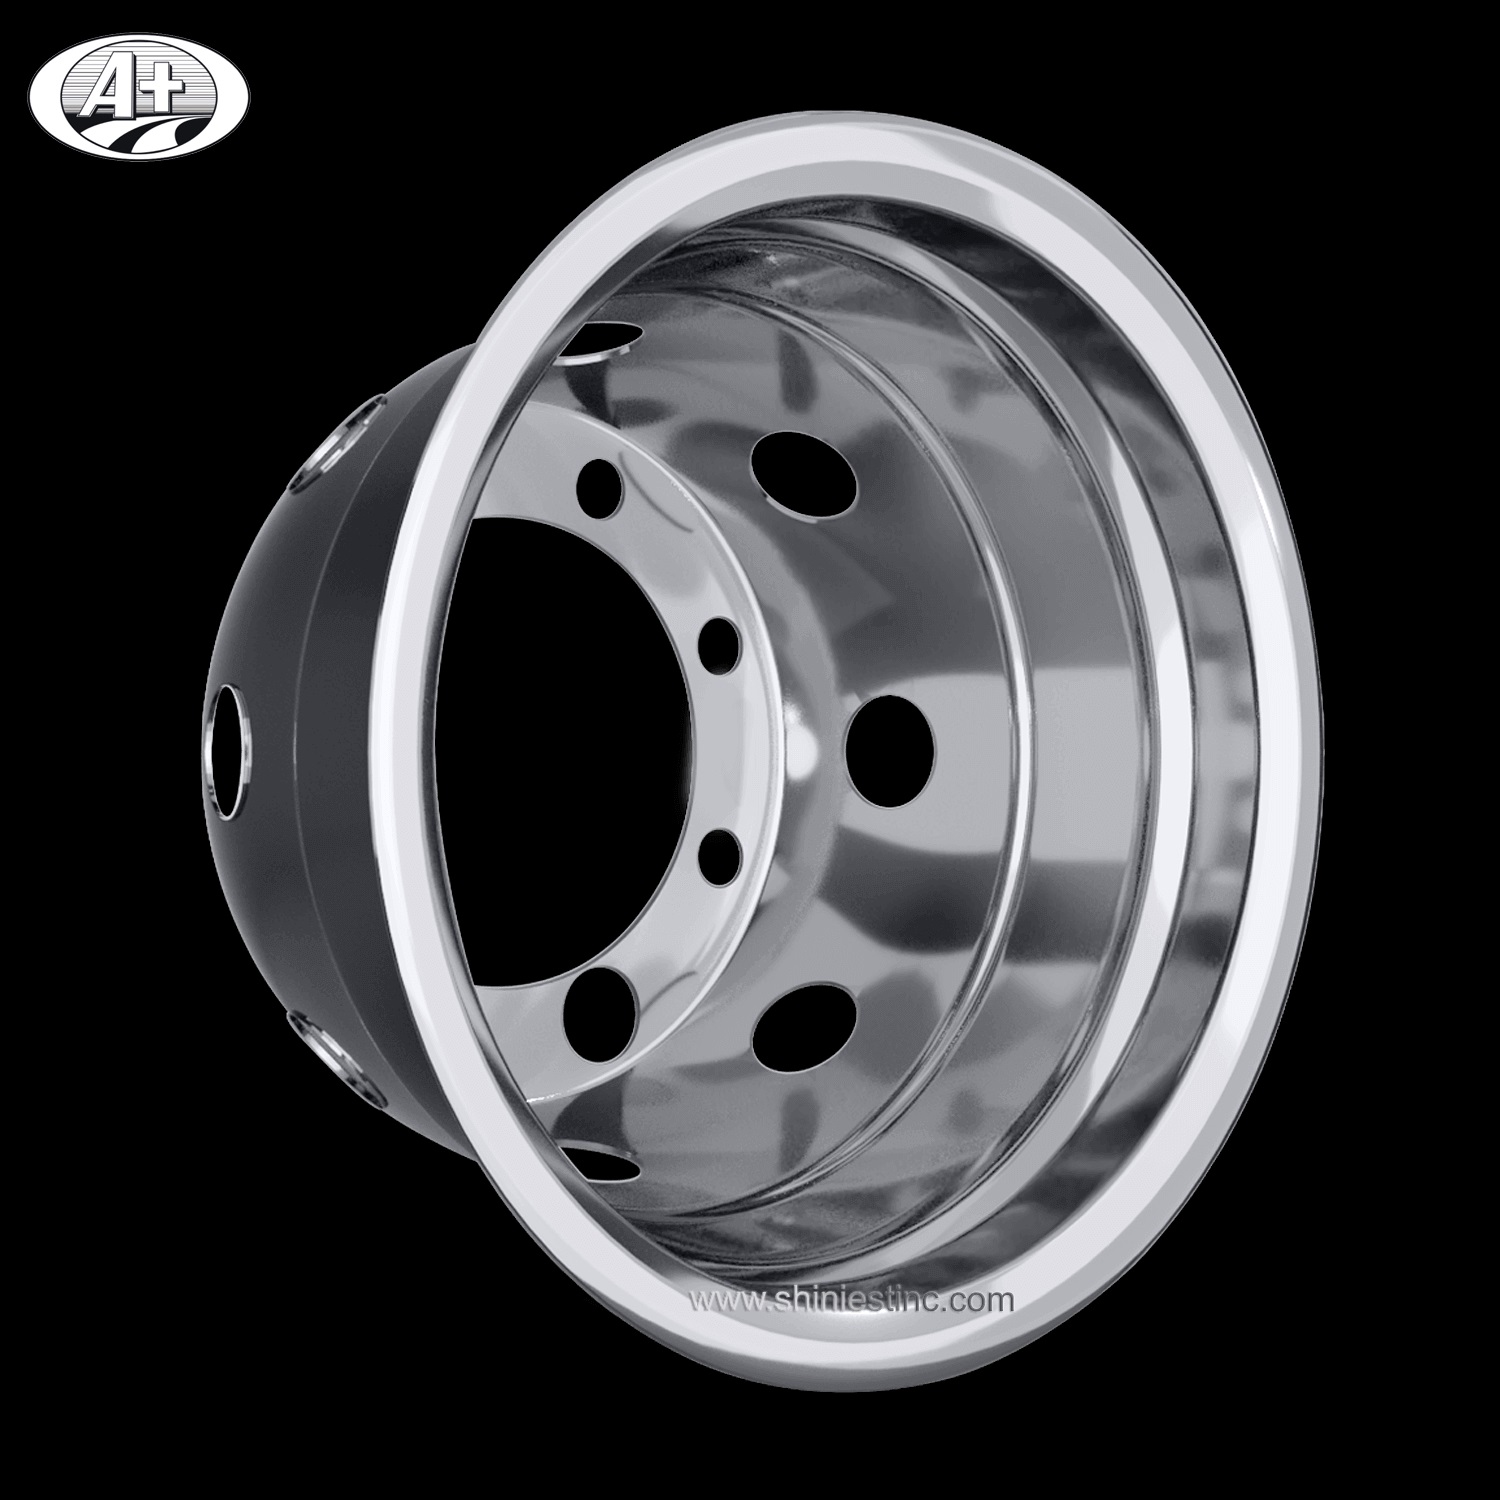 (70195RS) 19.5＂x 8.25＂T304 S/S Deep Wheel Liner for Rear Dual Wheel (Depth: 276mm)